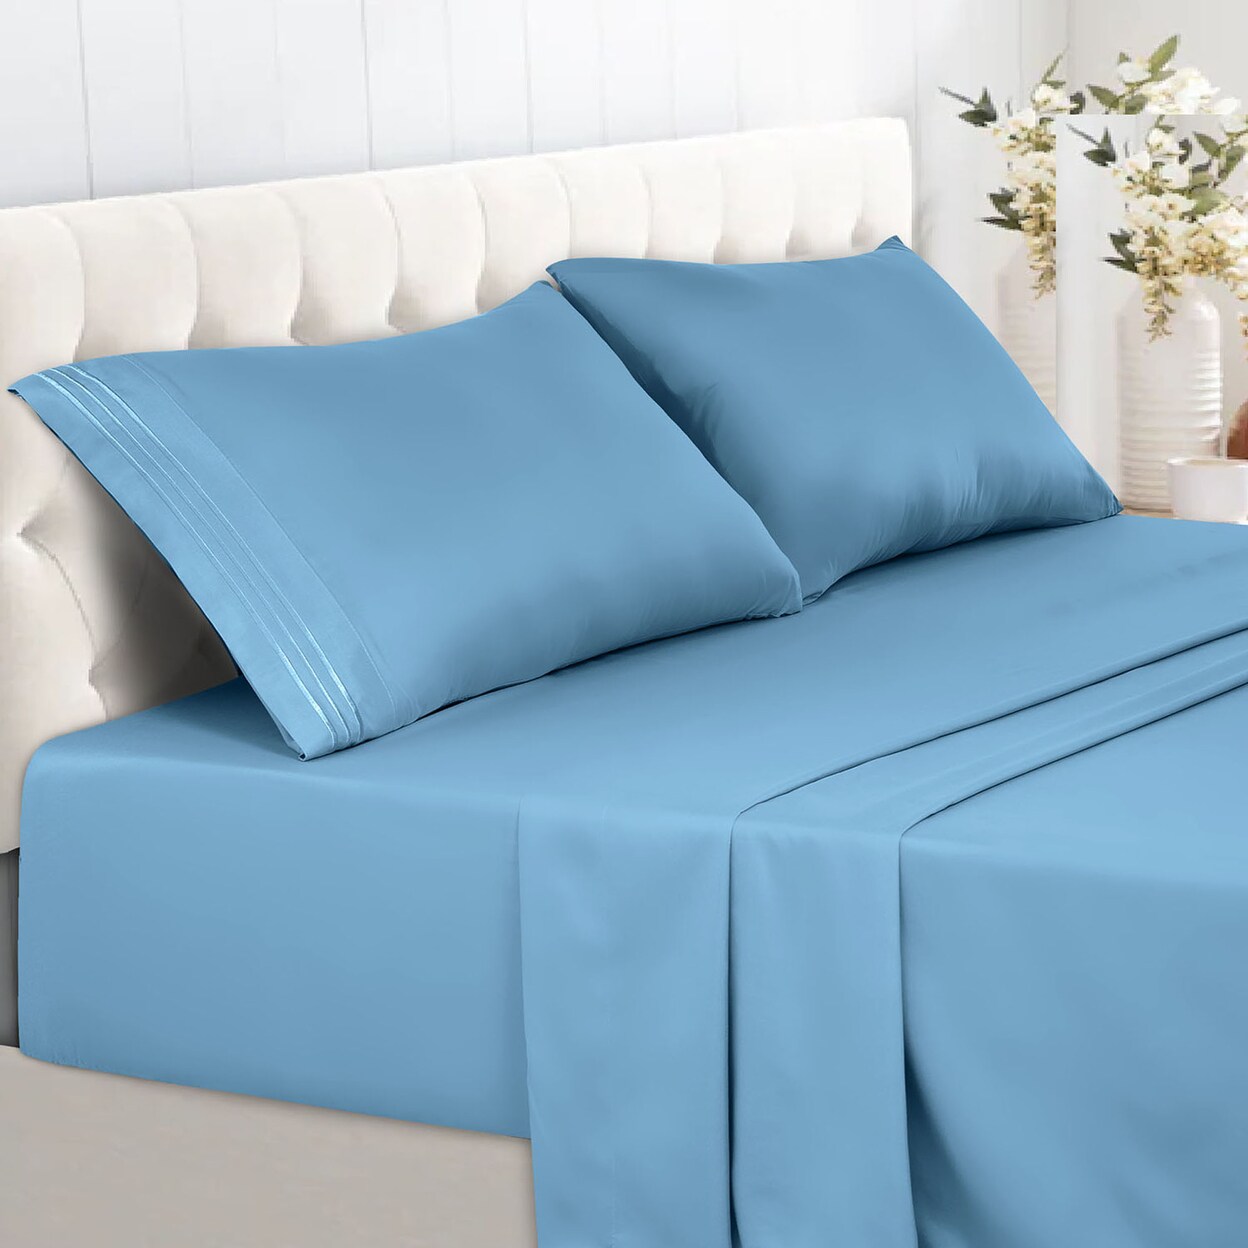 Lux Decor Collection 6-Piece Premier Collection Fitted Egyptian Cotton Bed Sheet Set